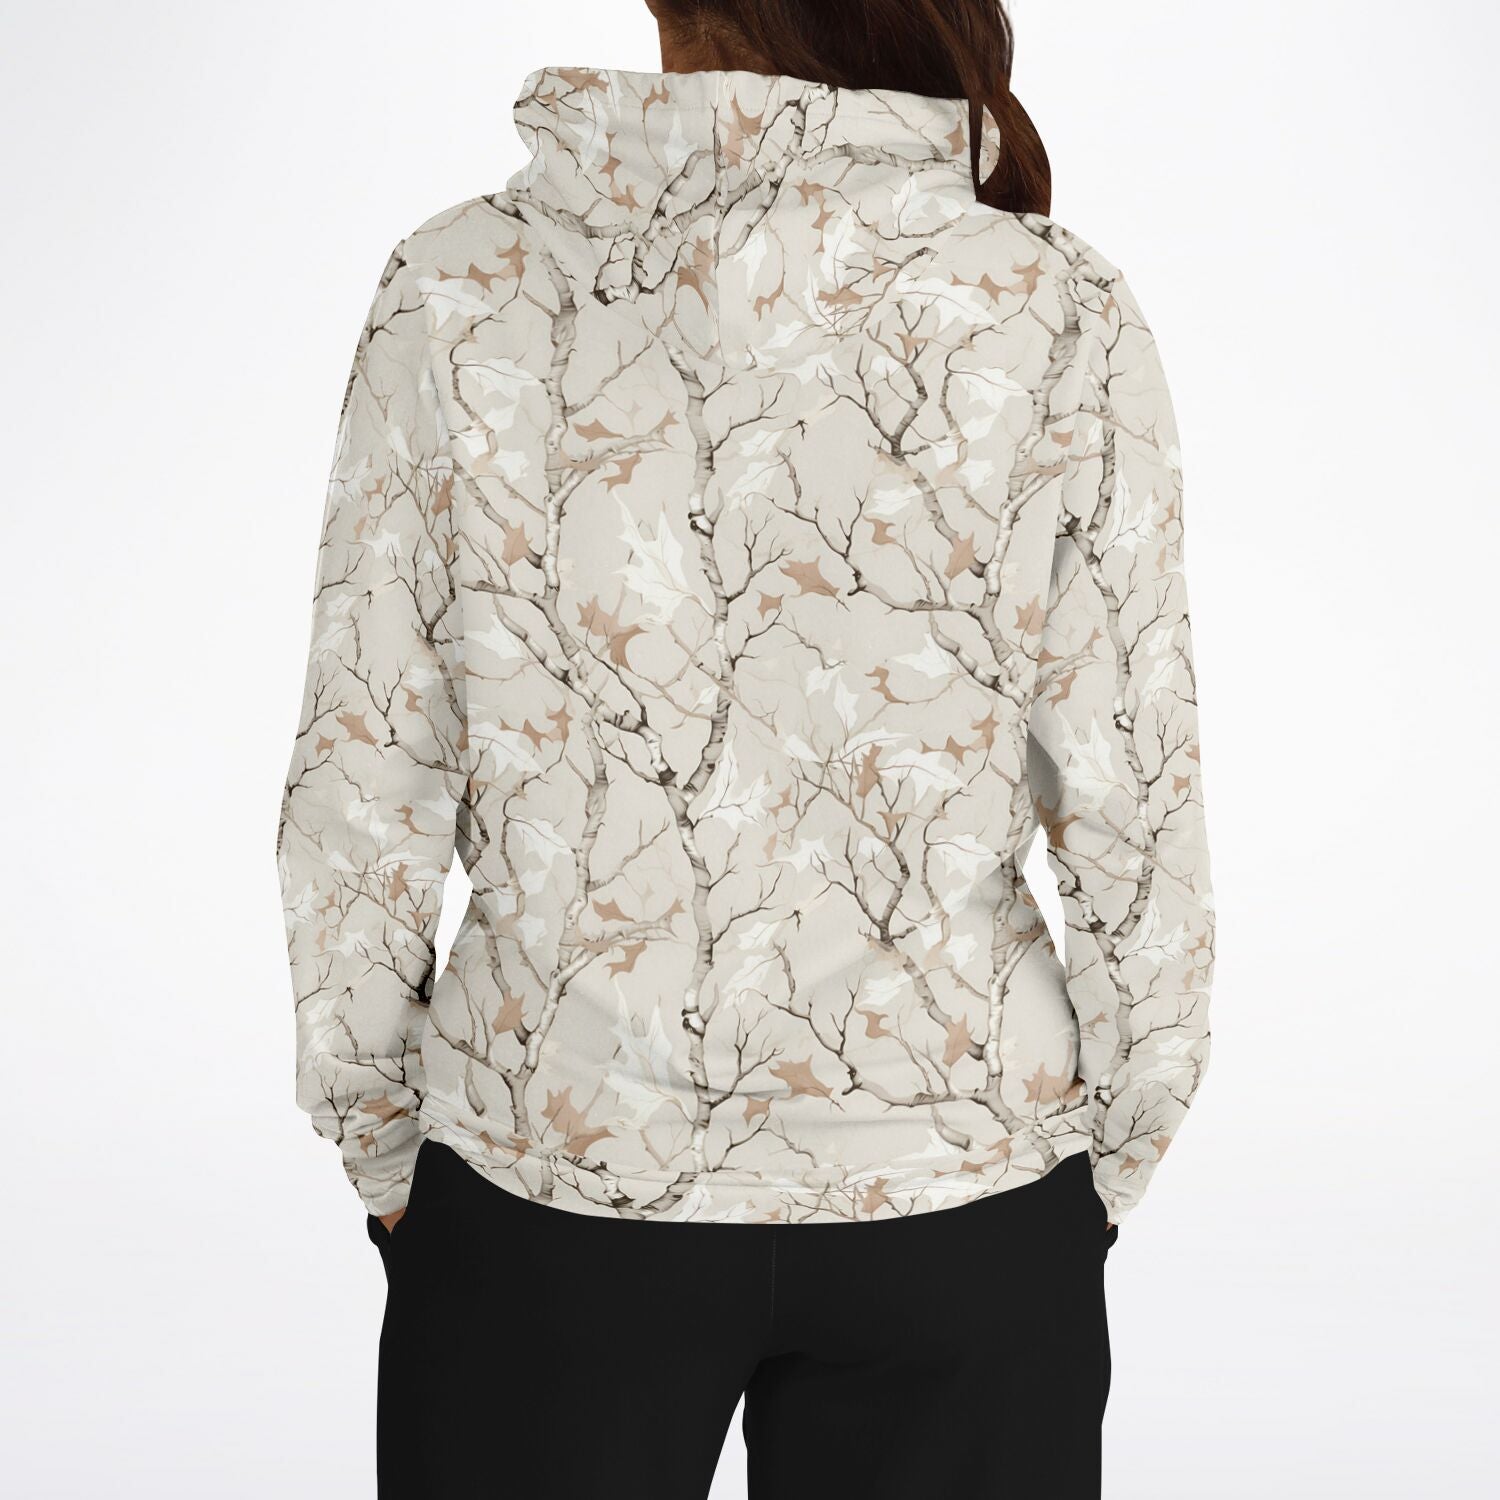 Real Camo Hoodie, Off White Cream Fall Leaf Camouflage Pullover Men Women Adult Aesthetic Graphic Cotton Hooded Sweatshirt Pockets Starcove Fashion